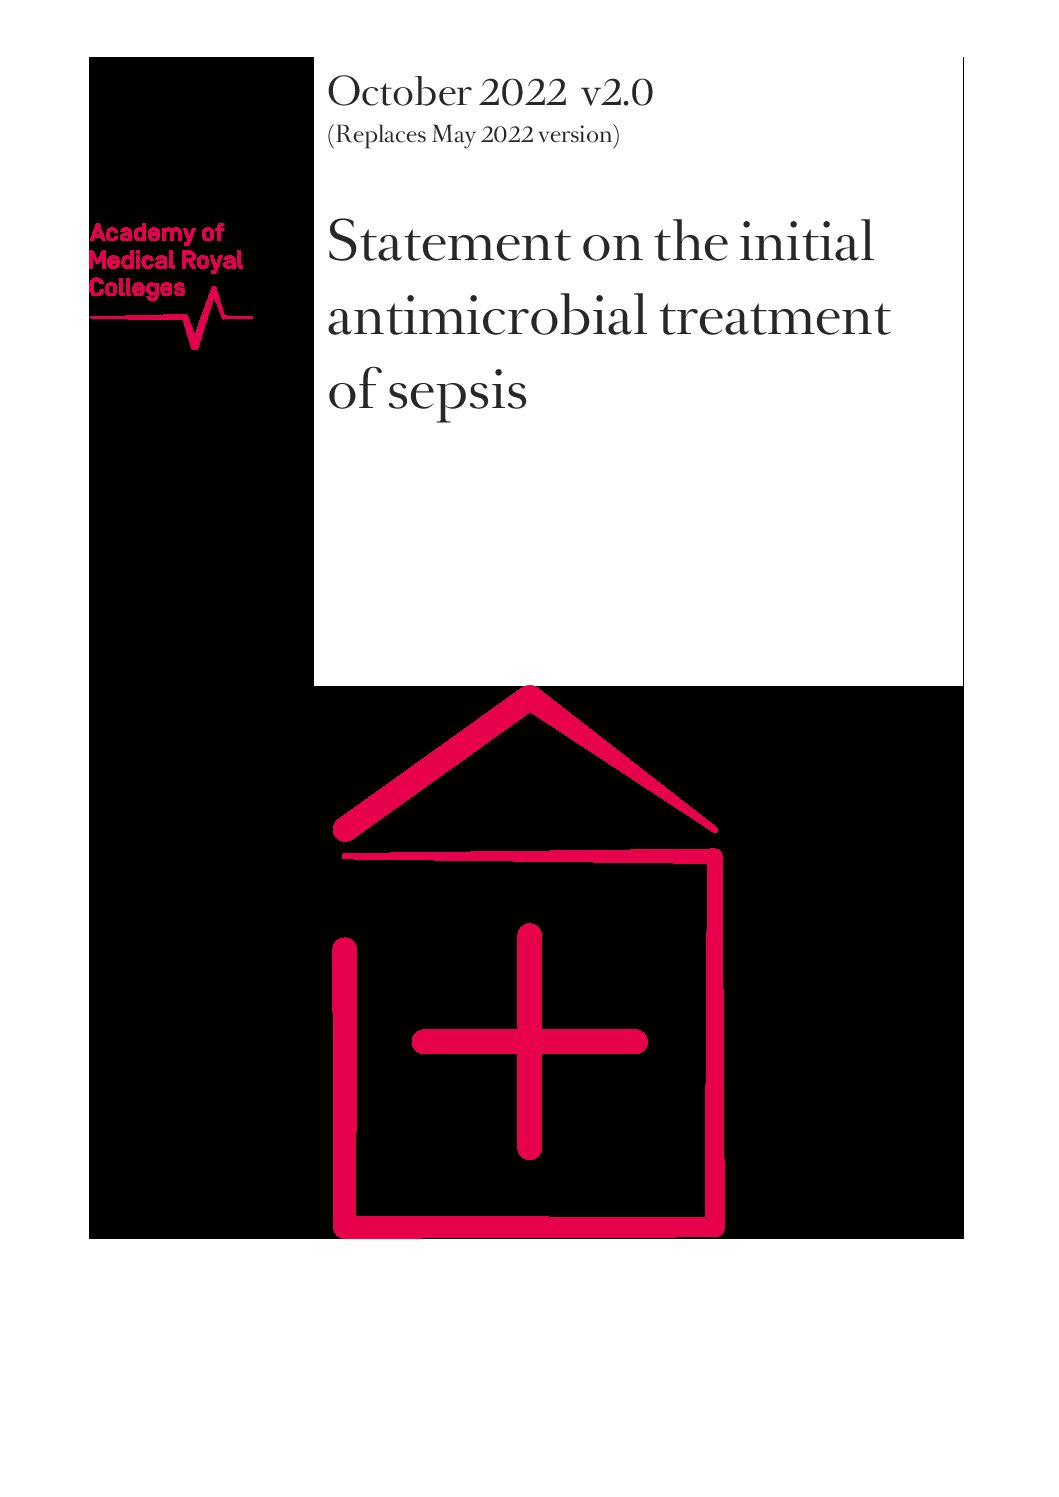 Statement on the initial<br />
antimicrobial treatment of sepsis